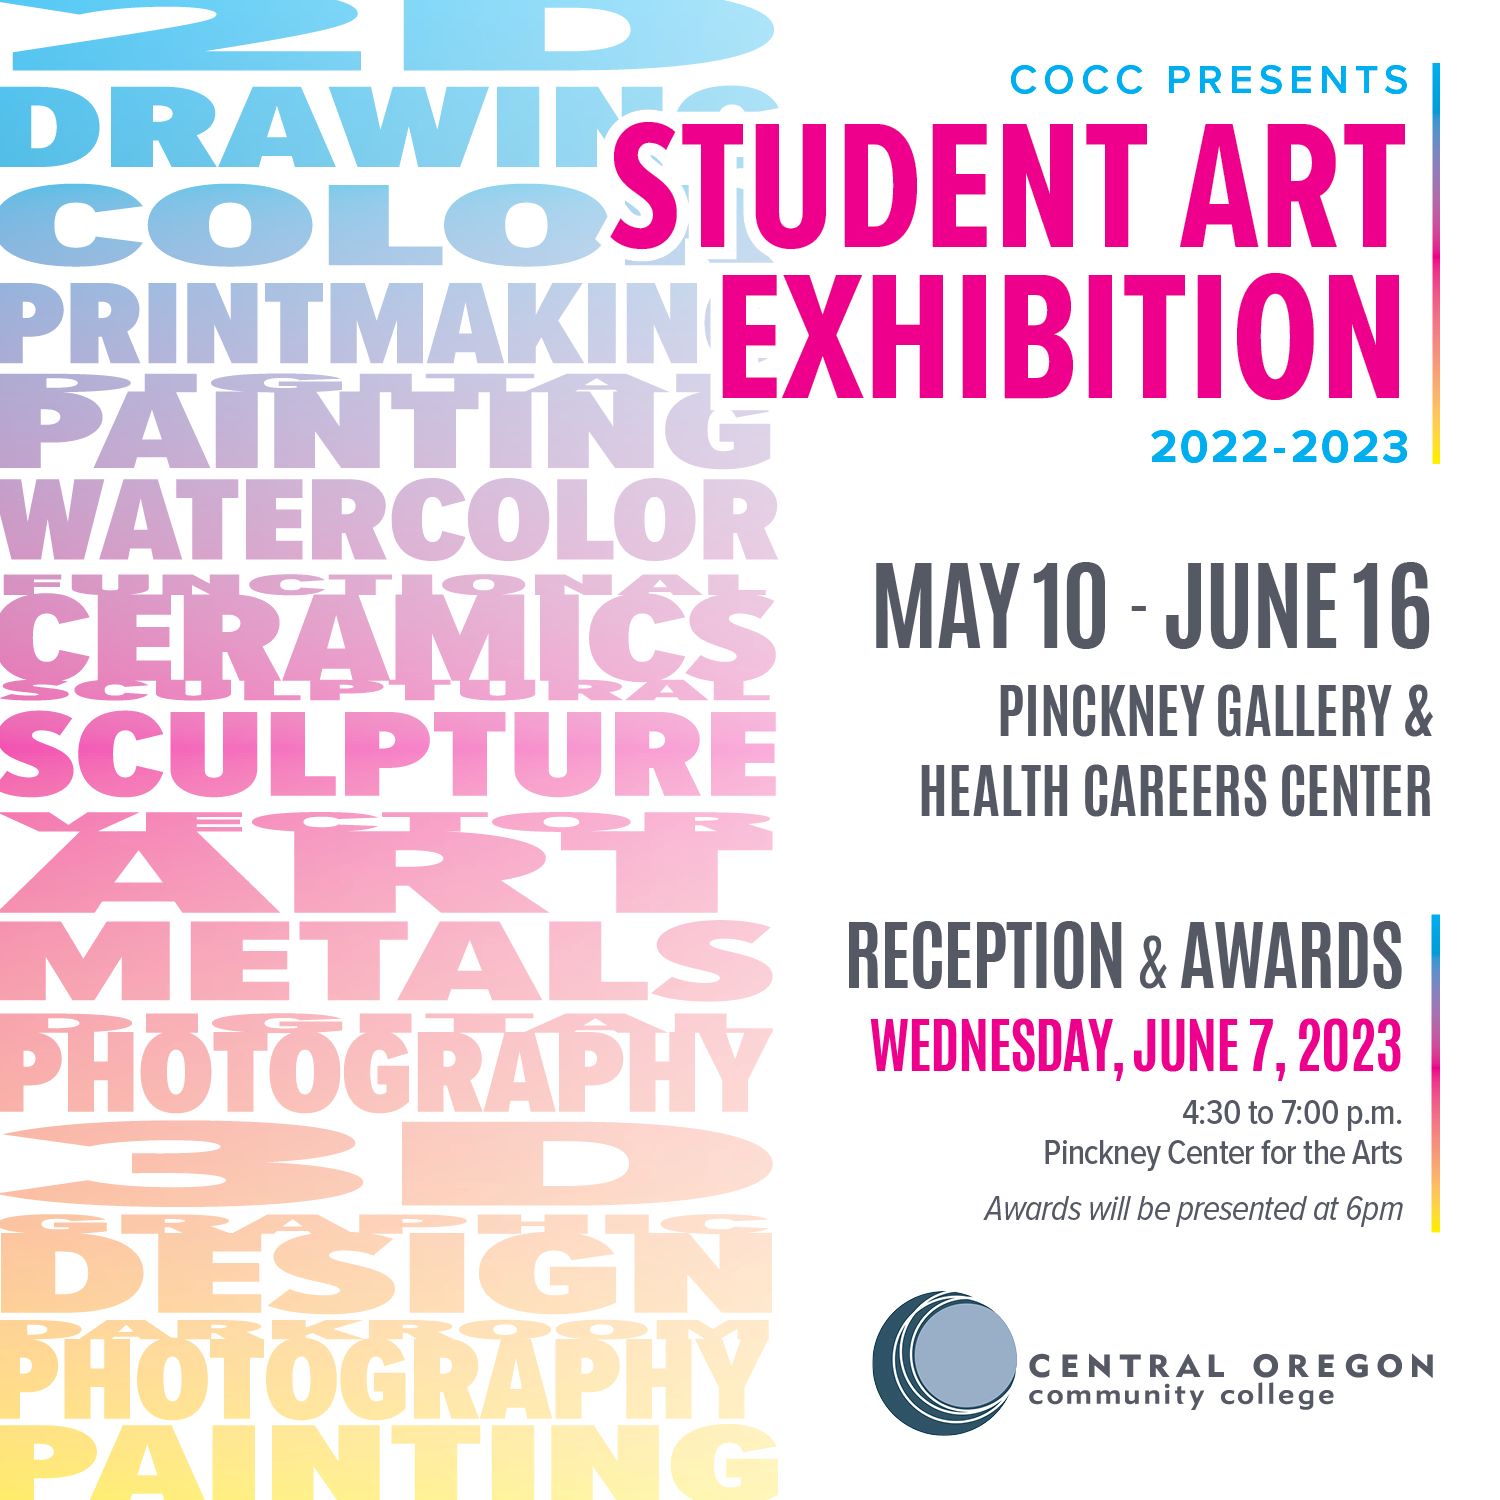 Promotional material for Student Art Exihibit